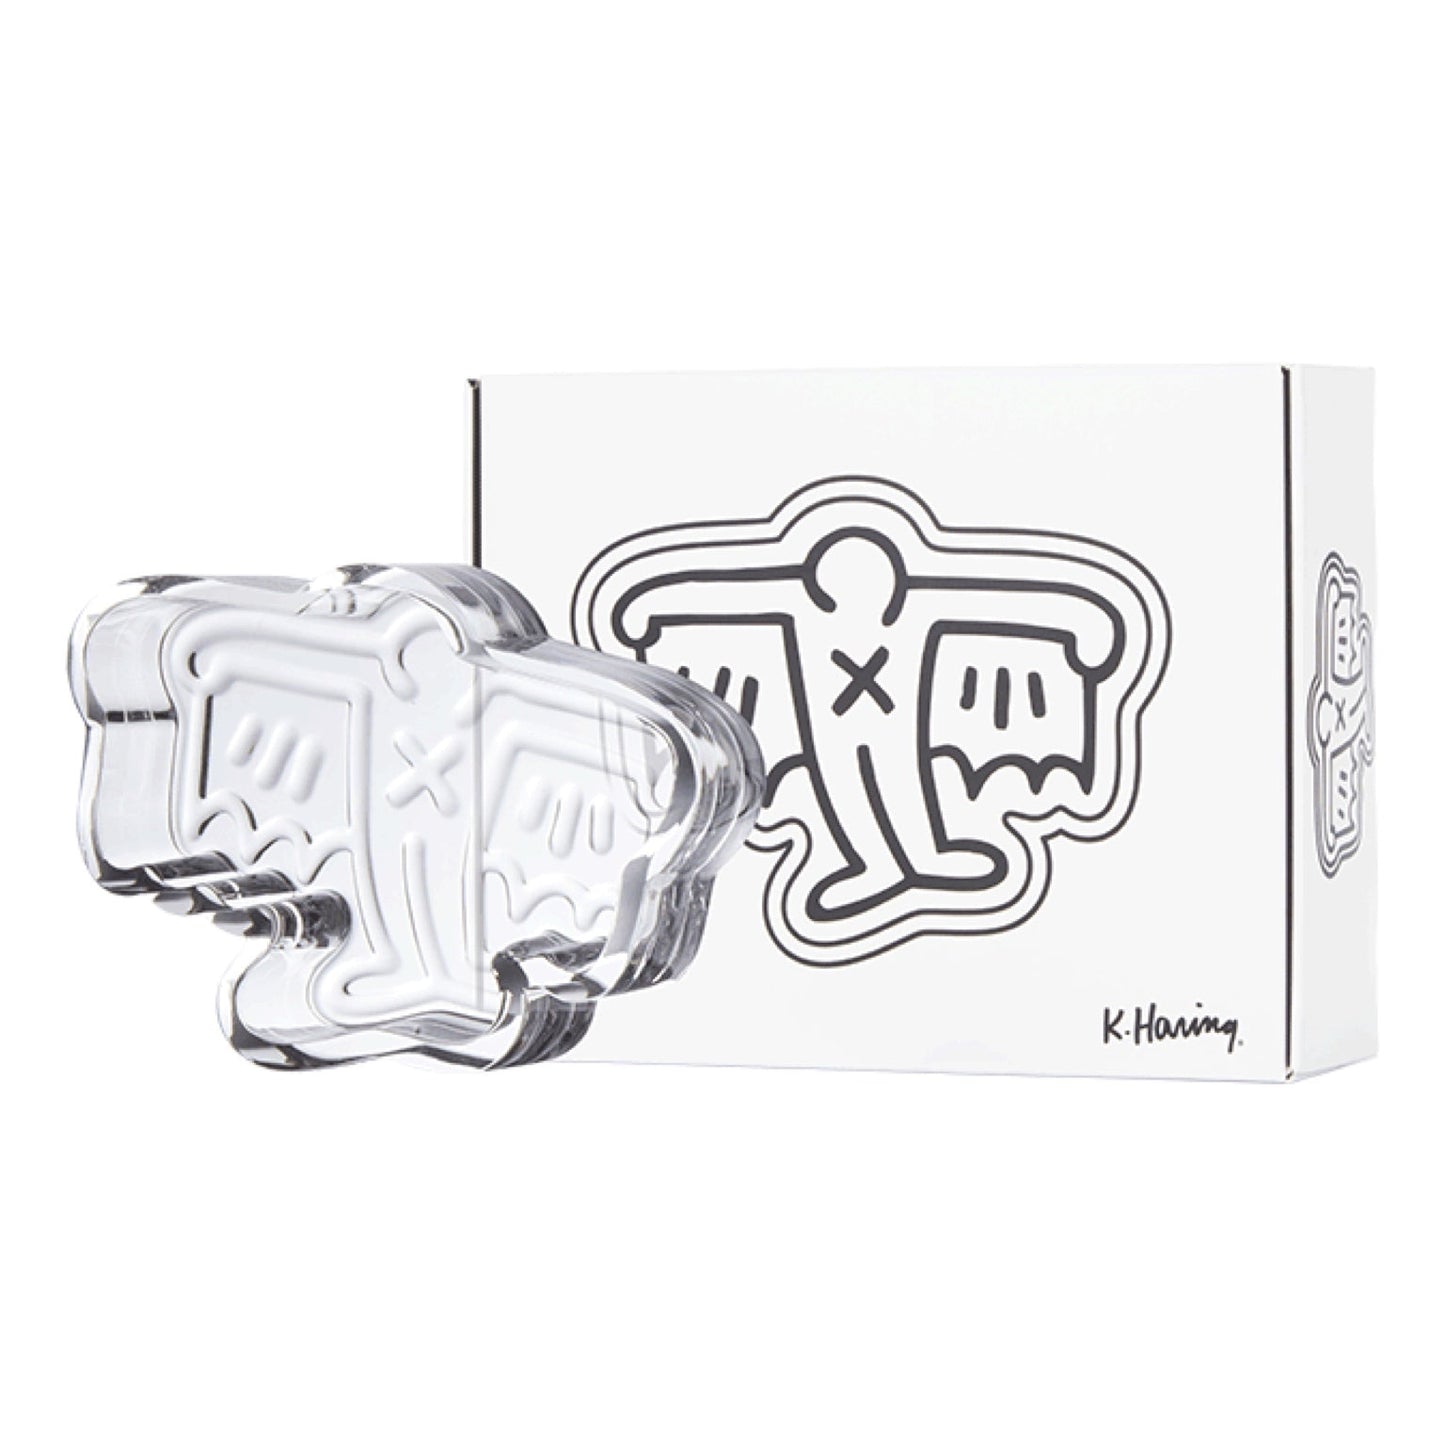 K. Haring “Bat Man” Crystal Glass Catchall by K. Haring Collection | Mission Dispensary